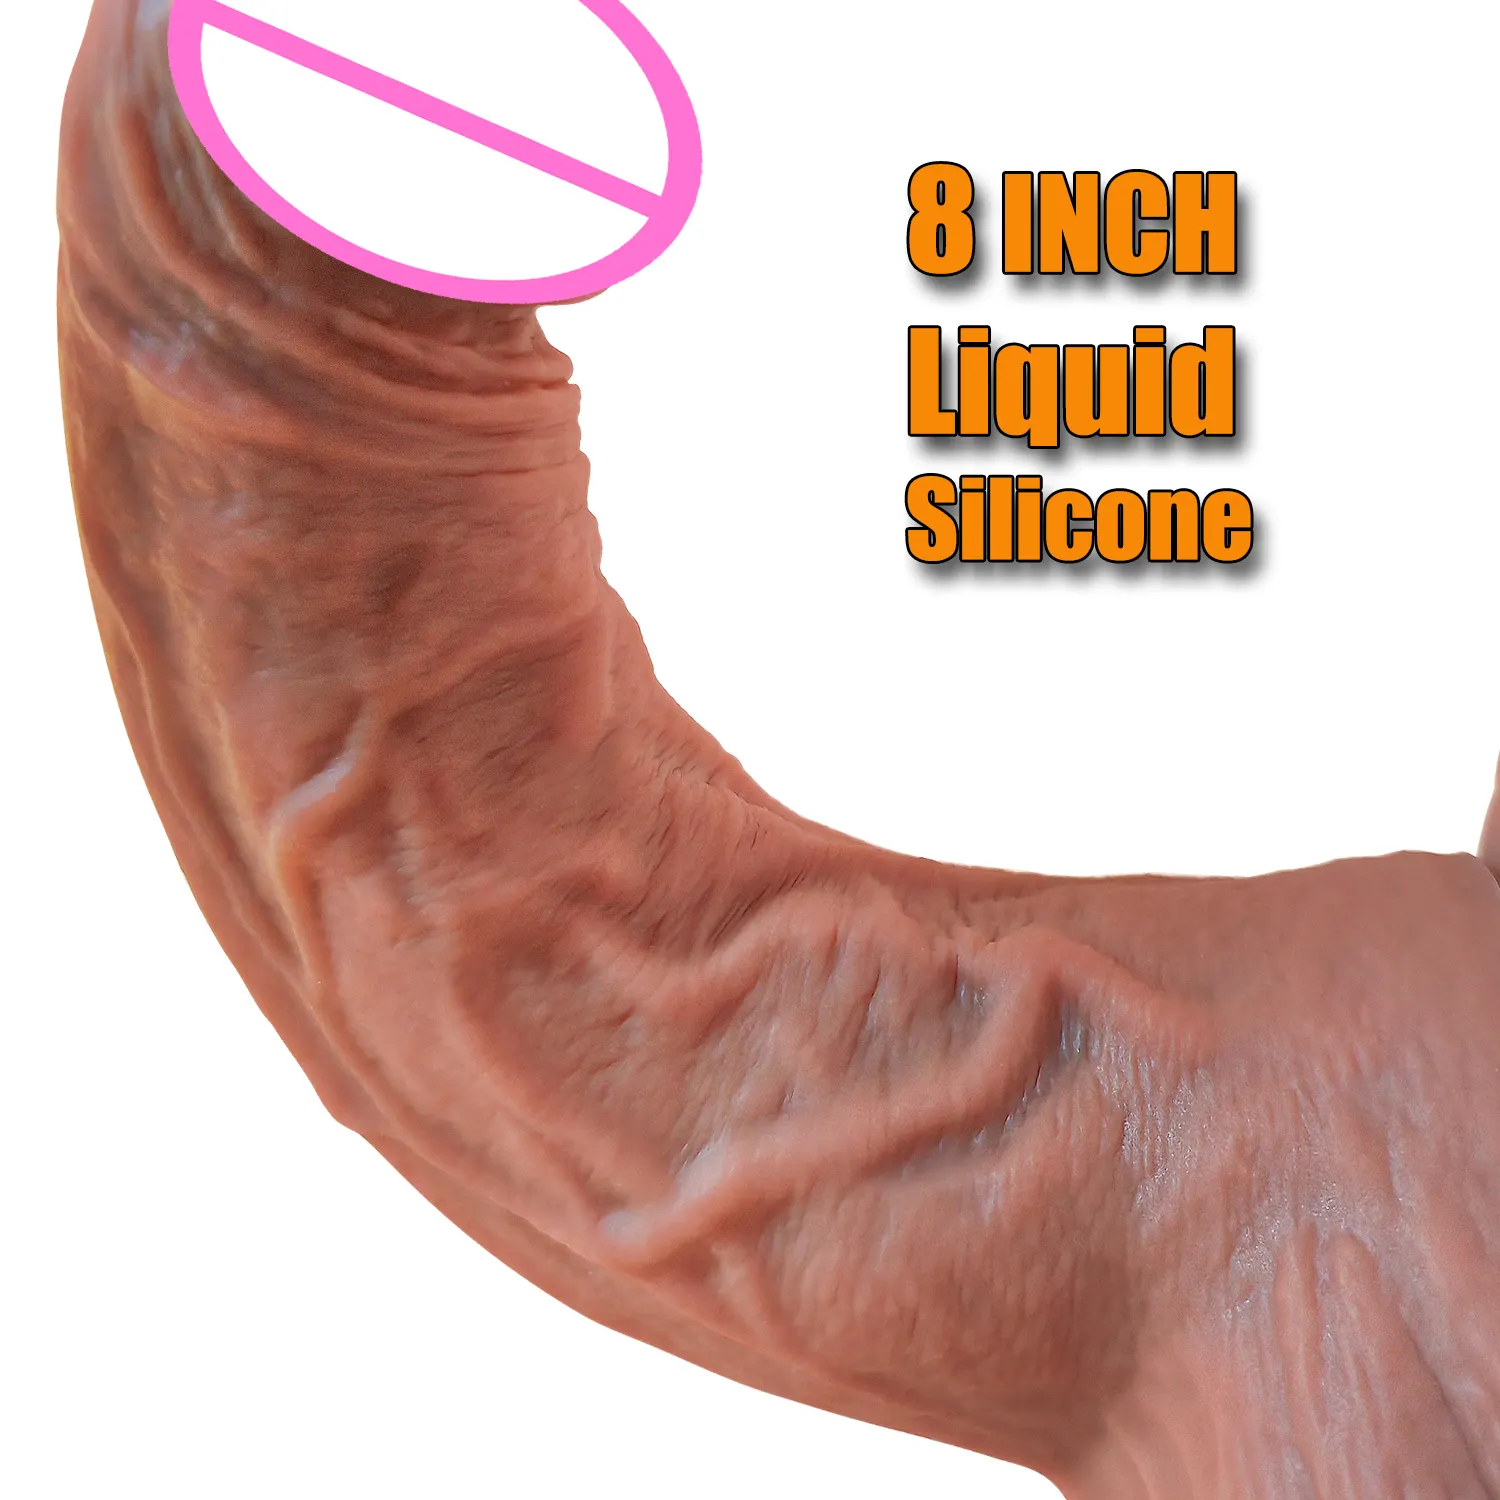 Good Selling China Dildo Silicone Sex Toys For Adult Girly China High Quality Liquid Silicone Dildo Artificial Rub